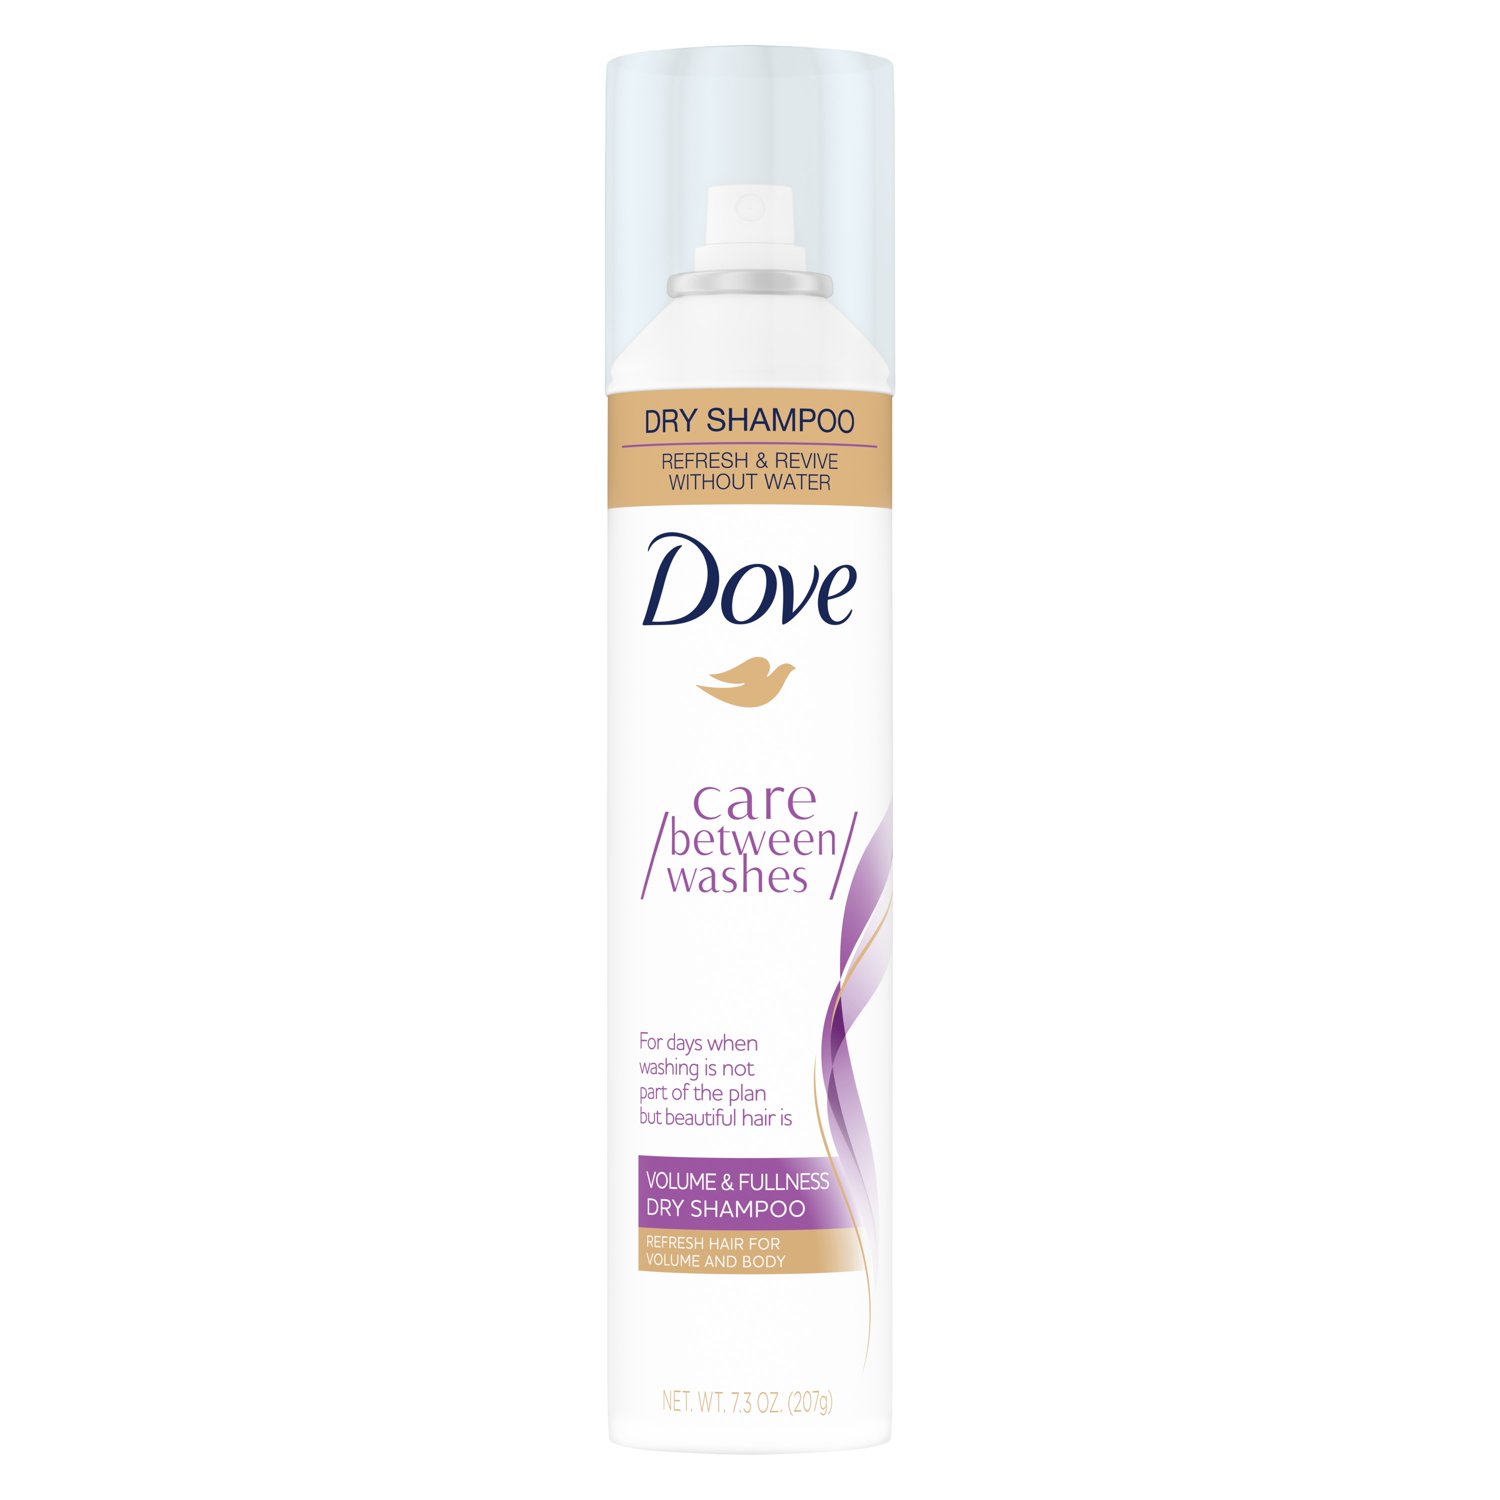 Dove Care Between Washes Volume and Fullness Dry Shampoo, 7.3 oz - image 1 of 10